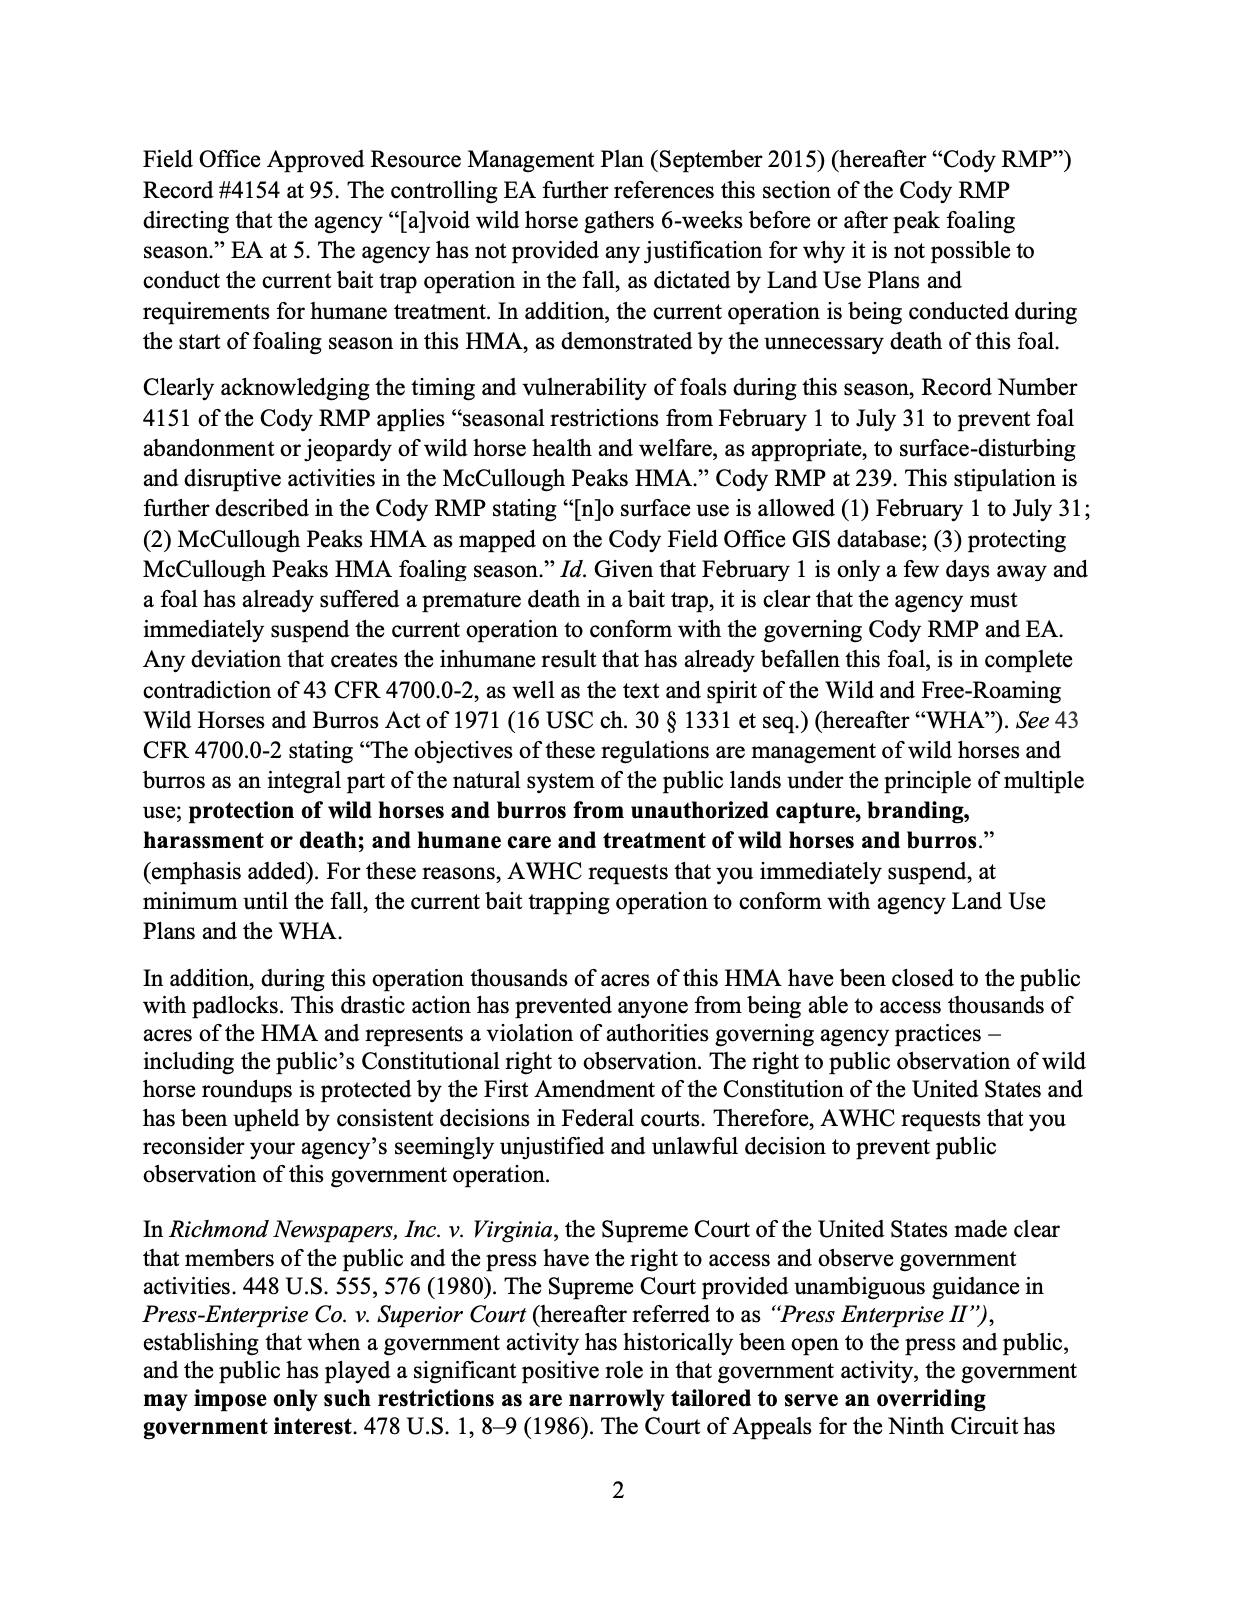 Page 2 of AWHC Legal Letter to BLM